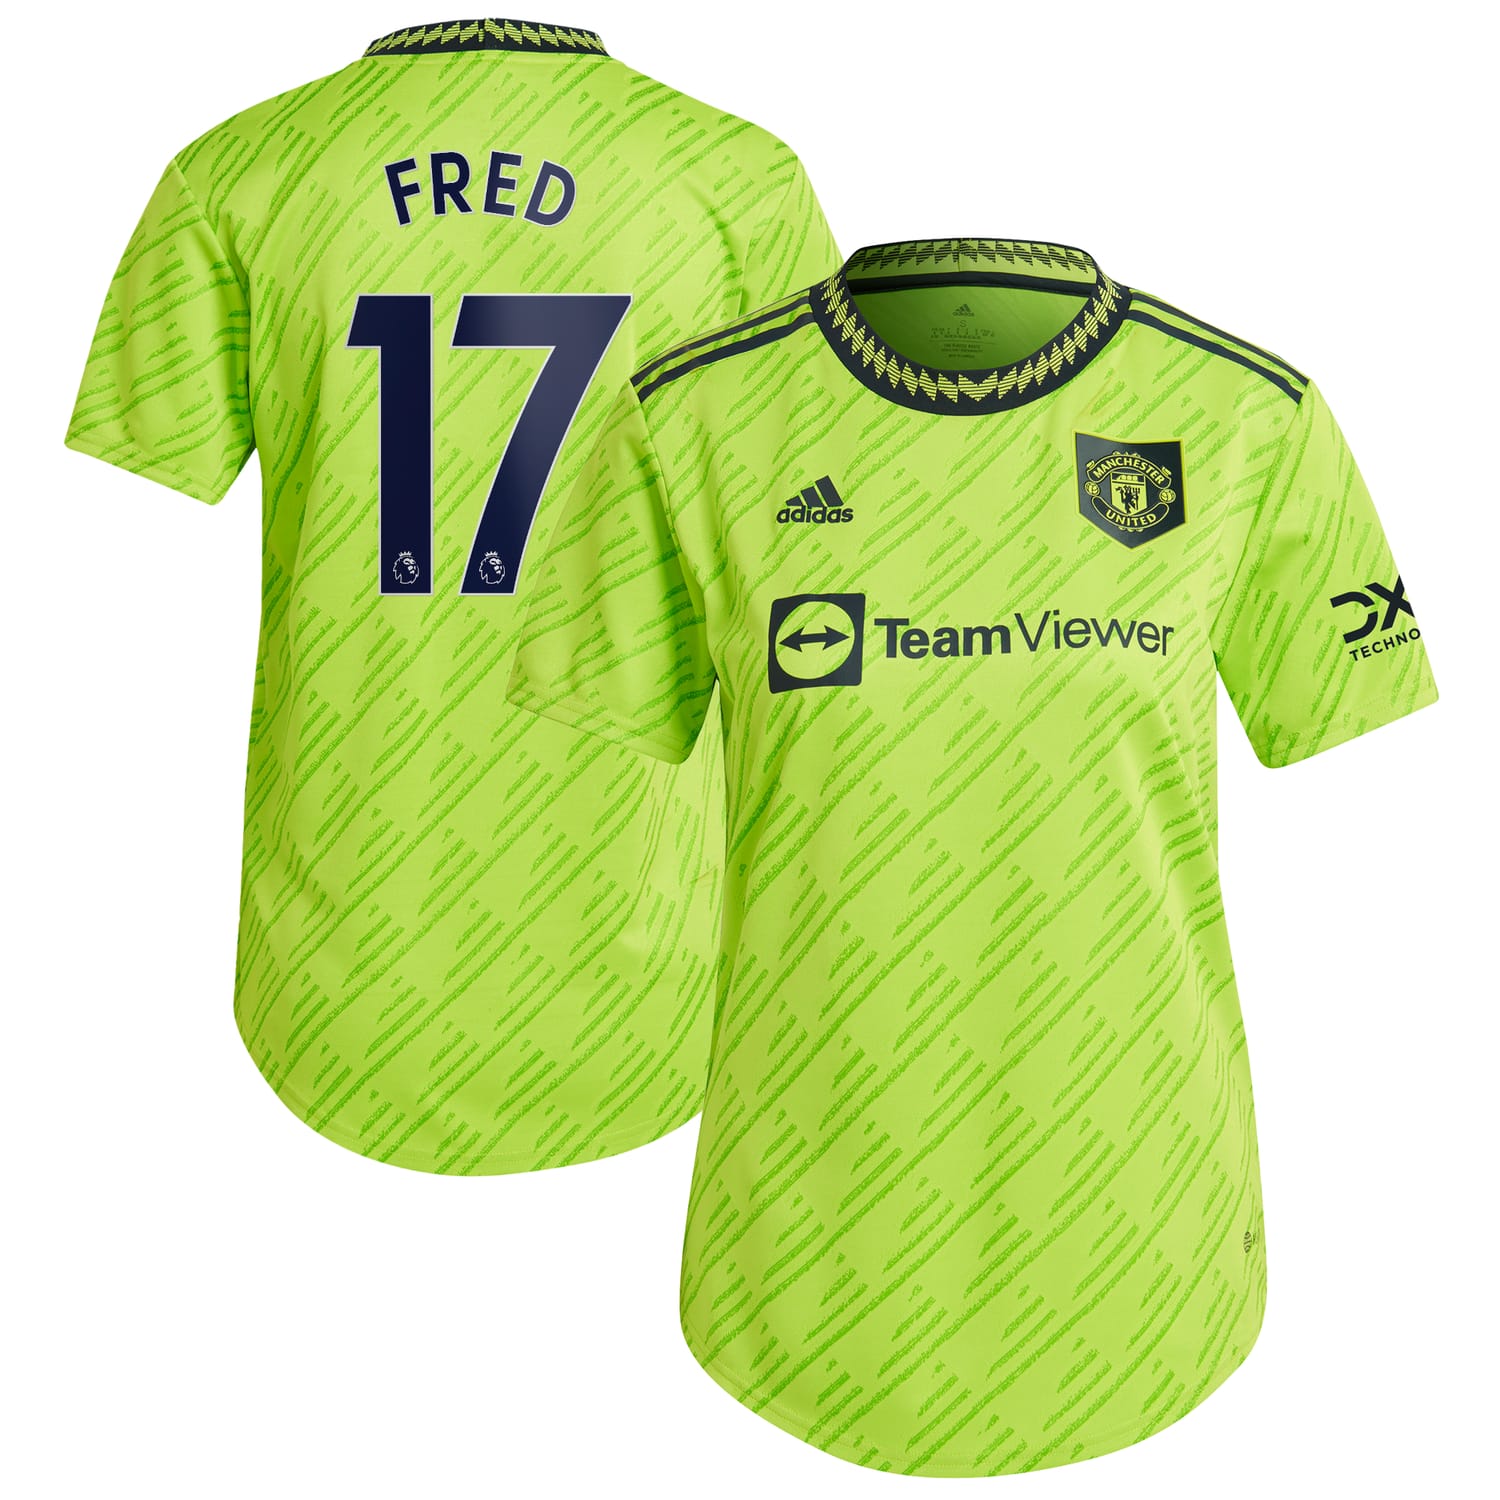 Premier League Manchester United Third Authentic Jersey Shirt 2022-23 player Fred 17 printing for Women